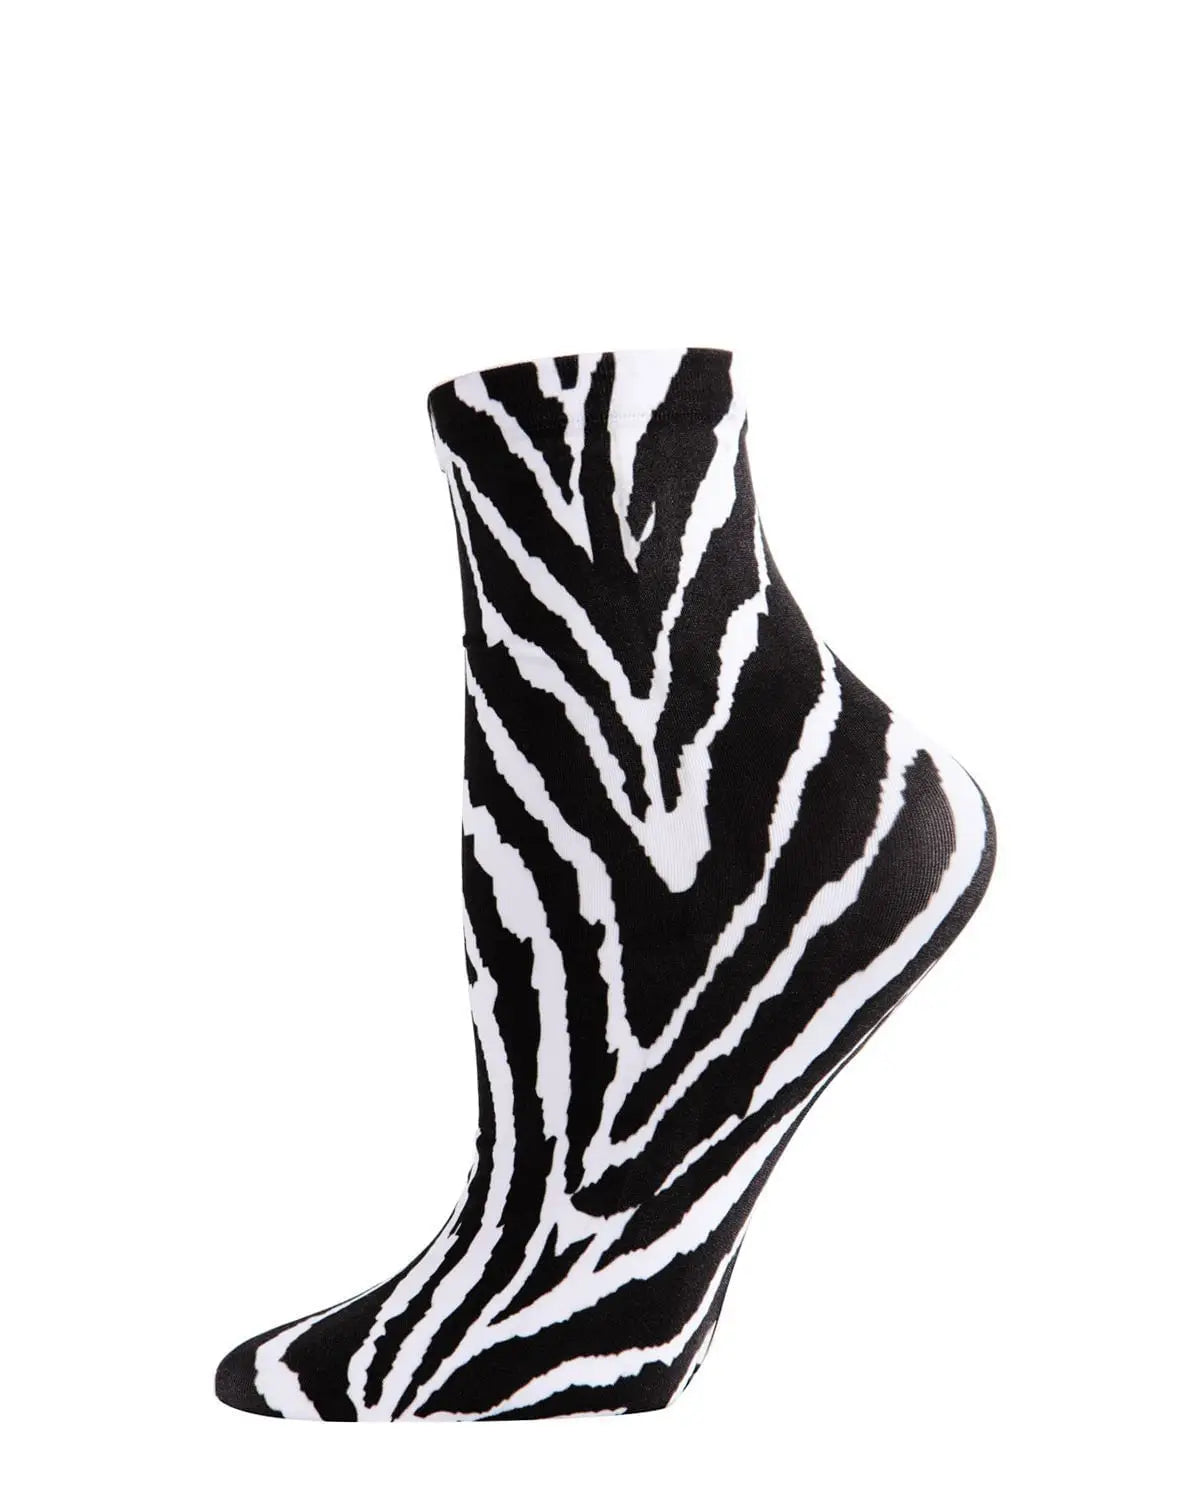 A mannequin foot wearing a black and white zebra print ankle length sock 